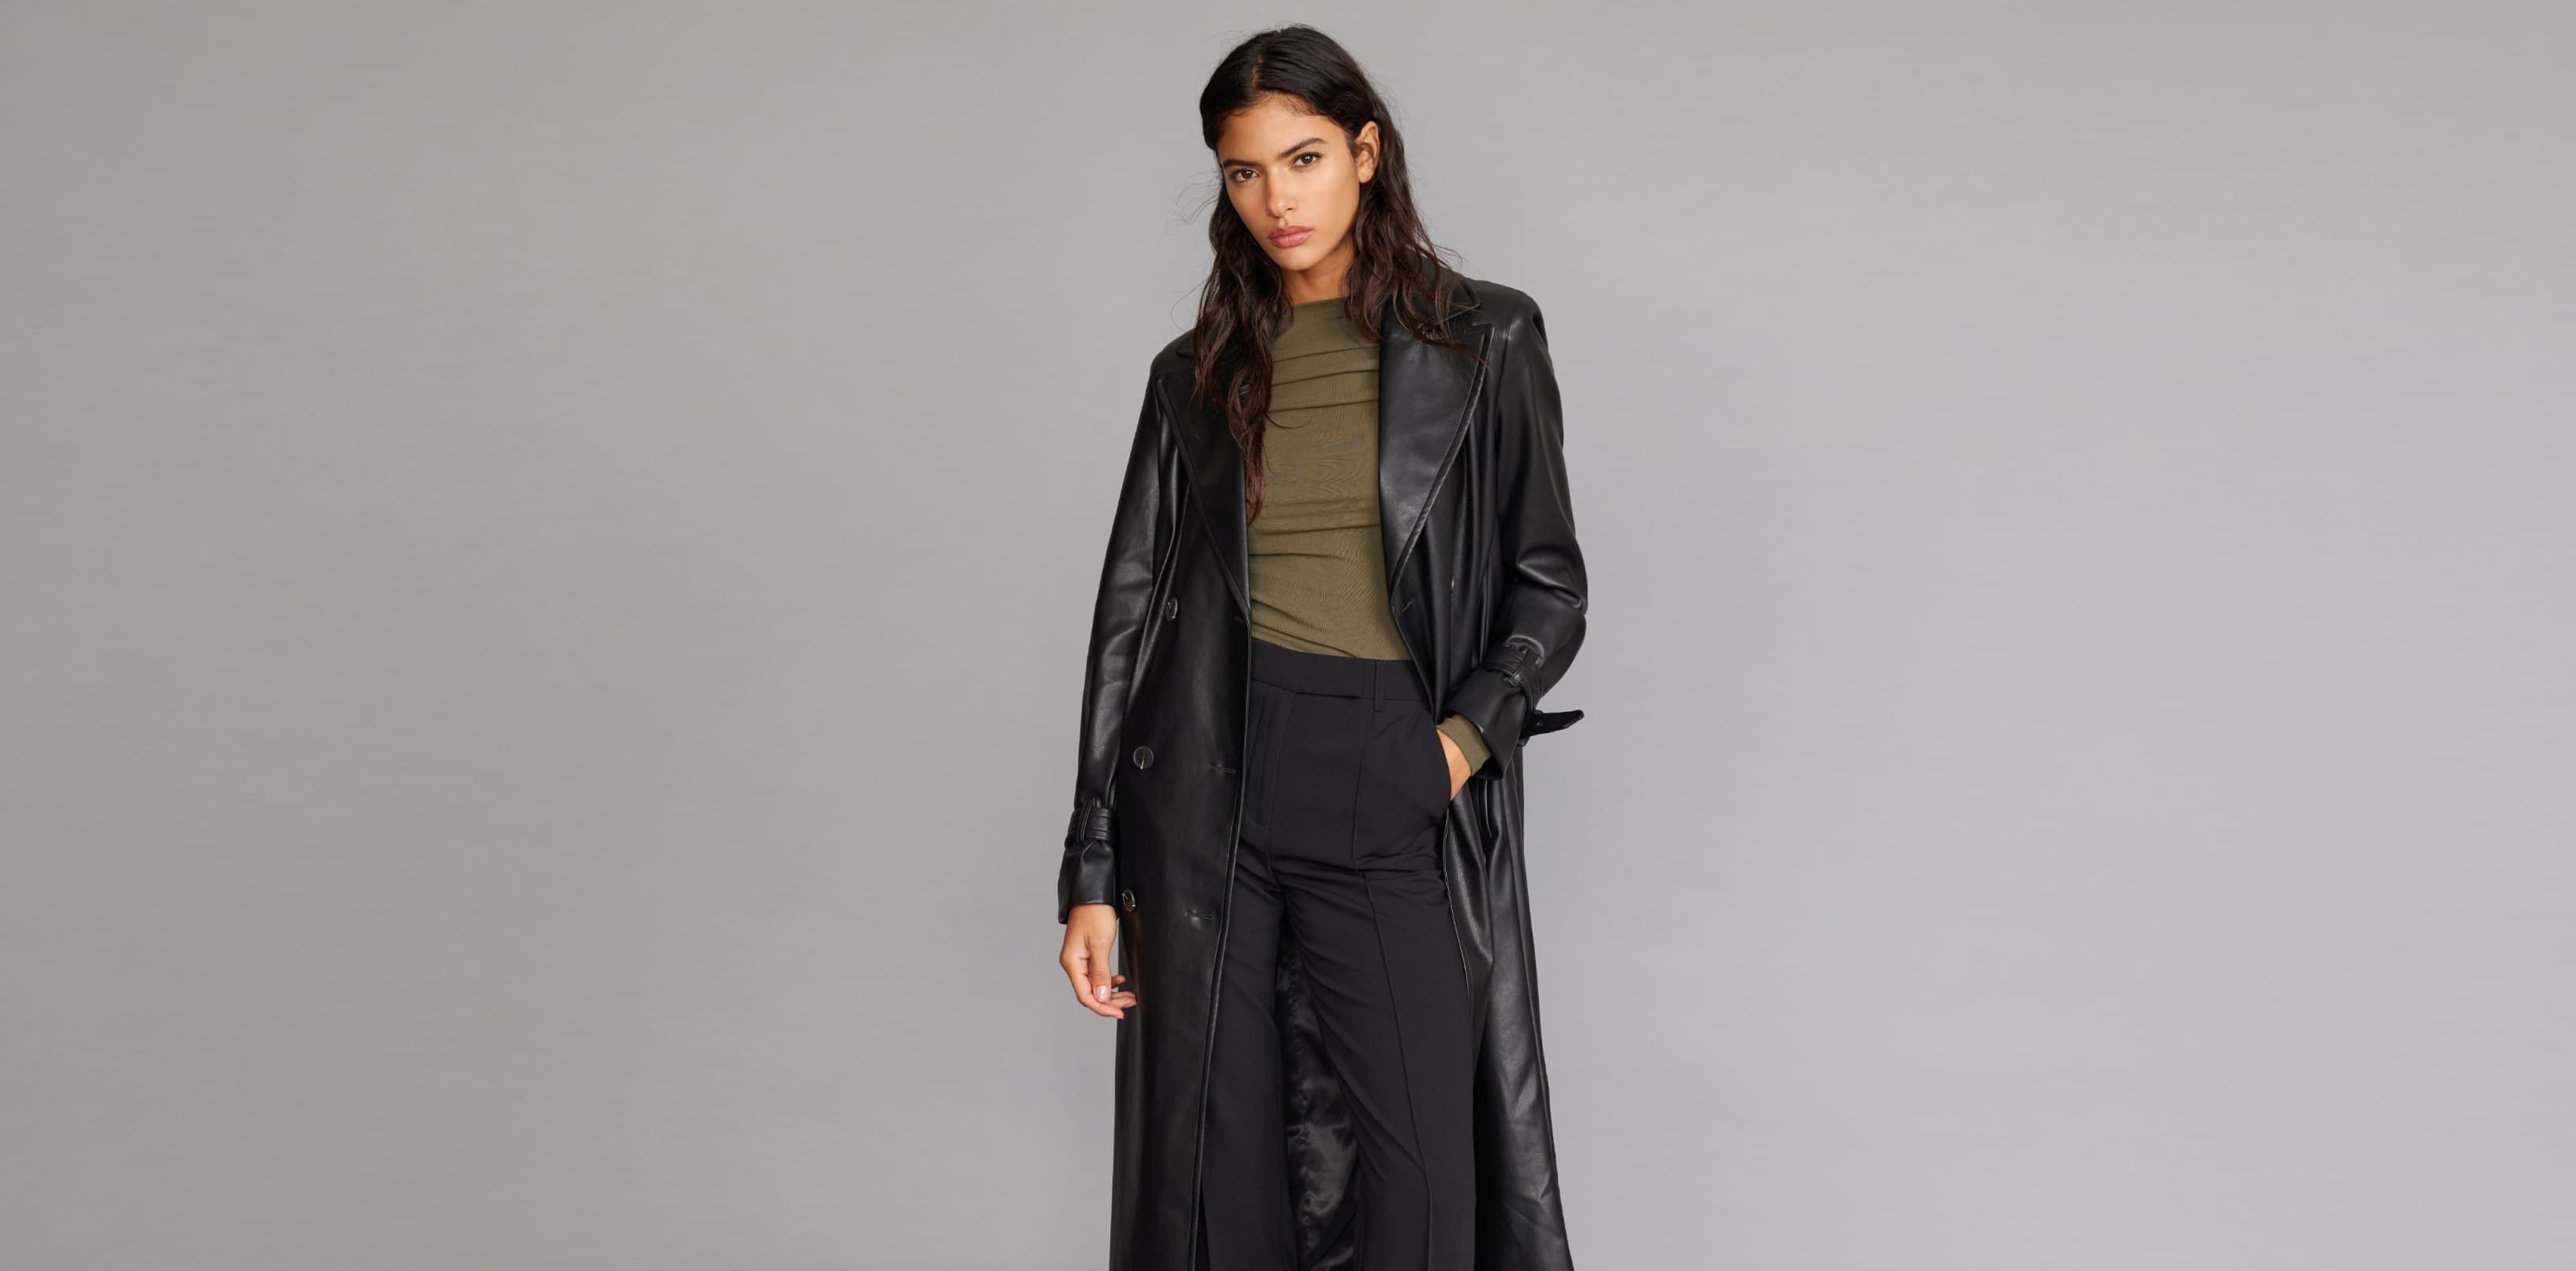 A model wears a black faux leather trench coat with black pants and a brown top.